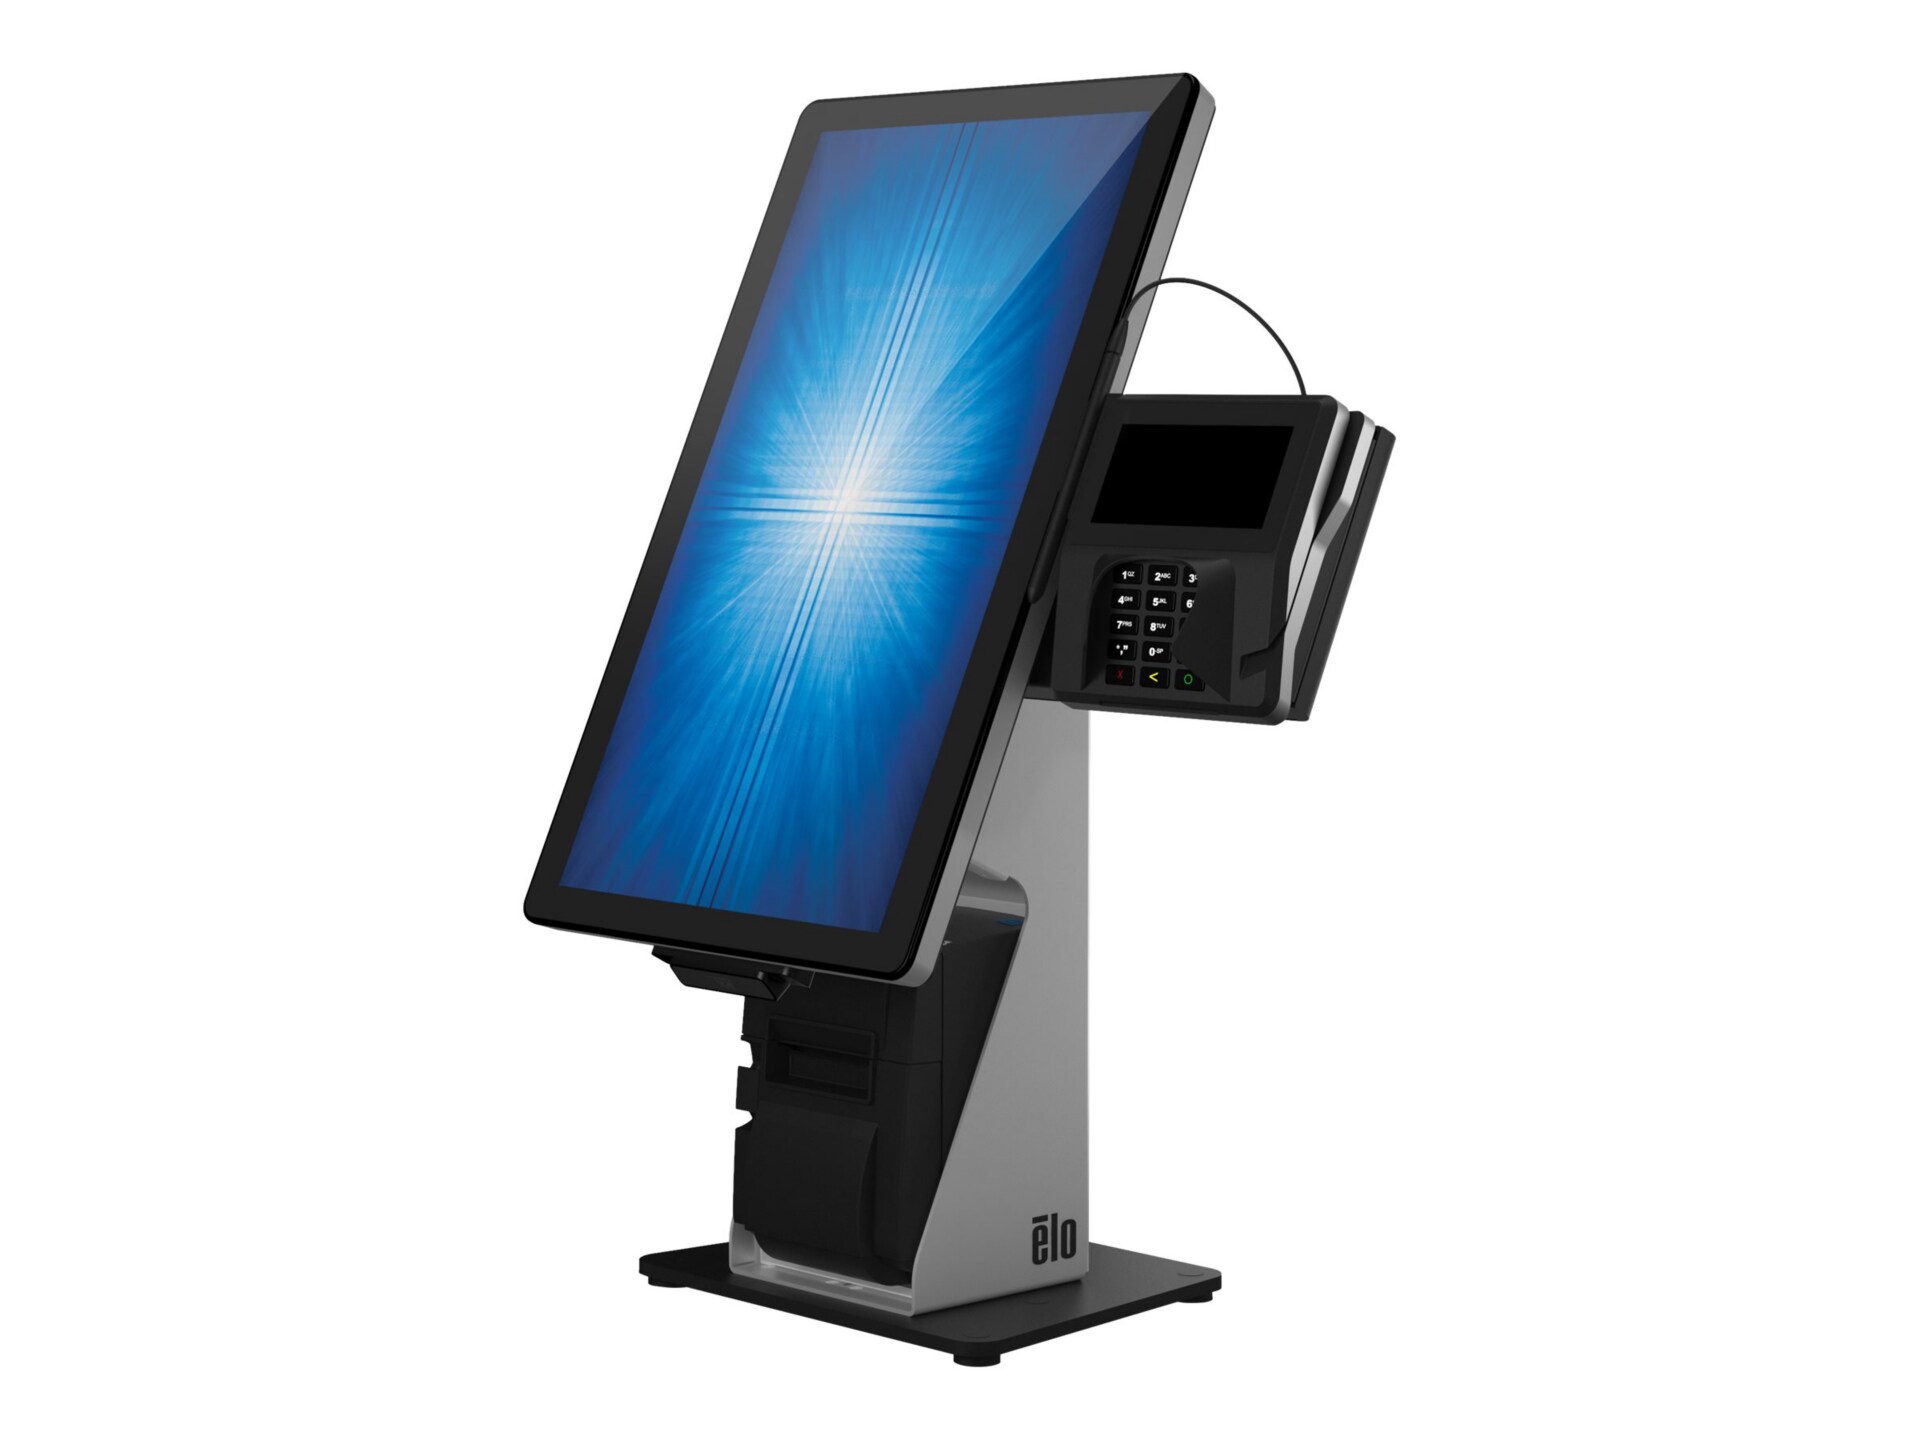 Elo Wallaby Self-Service Countertop Stand - stand